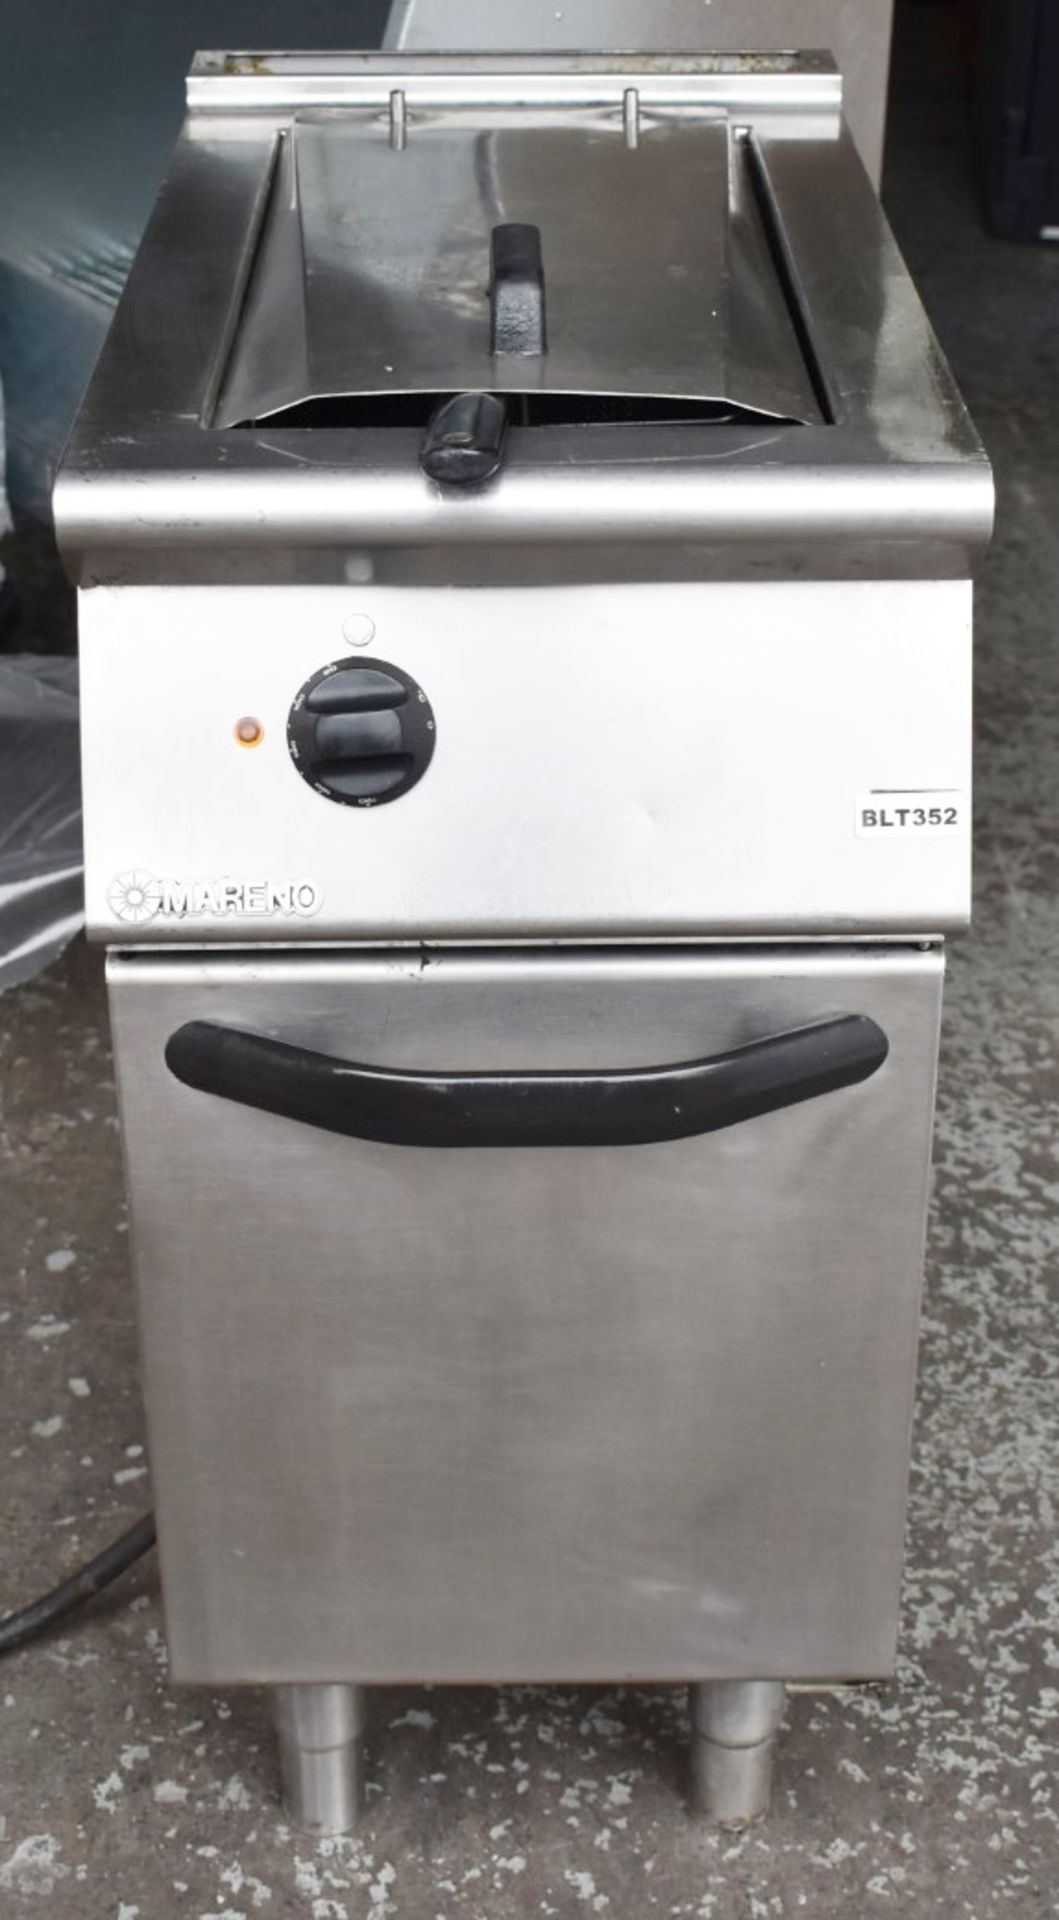 1 x Mareno Single Tank Fryer With Stainless Steel Finish - 3 Phase -H90 x W40 x D75 cms - CL232 - - Image 8 of 10